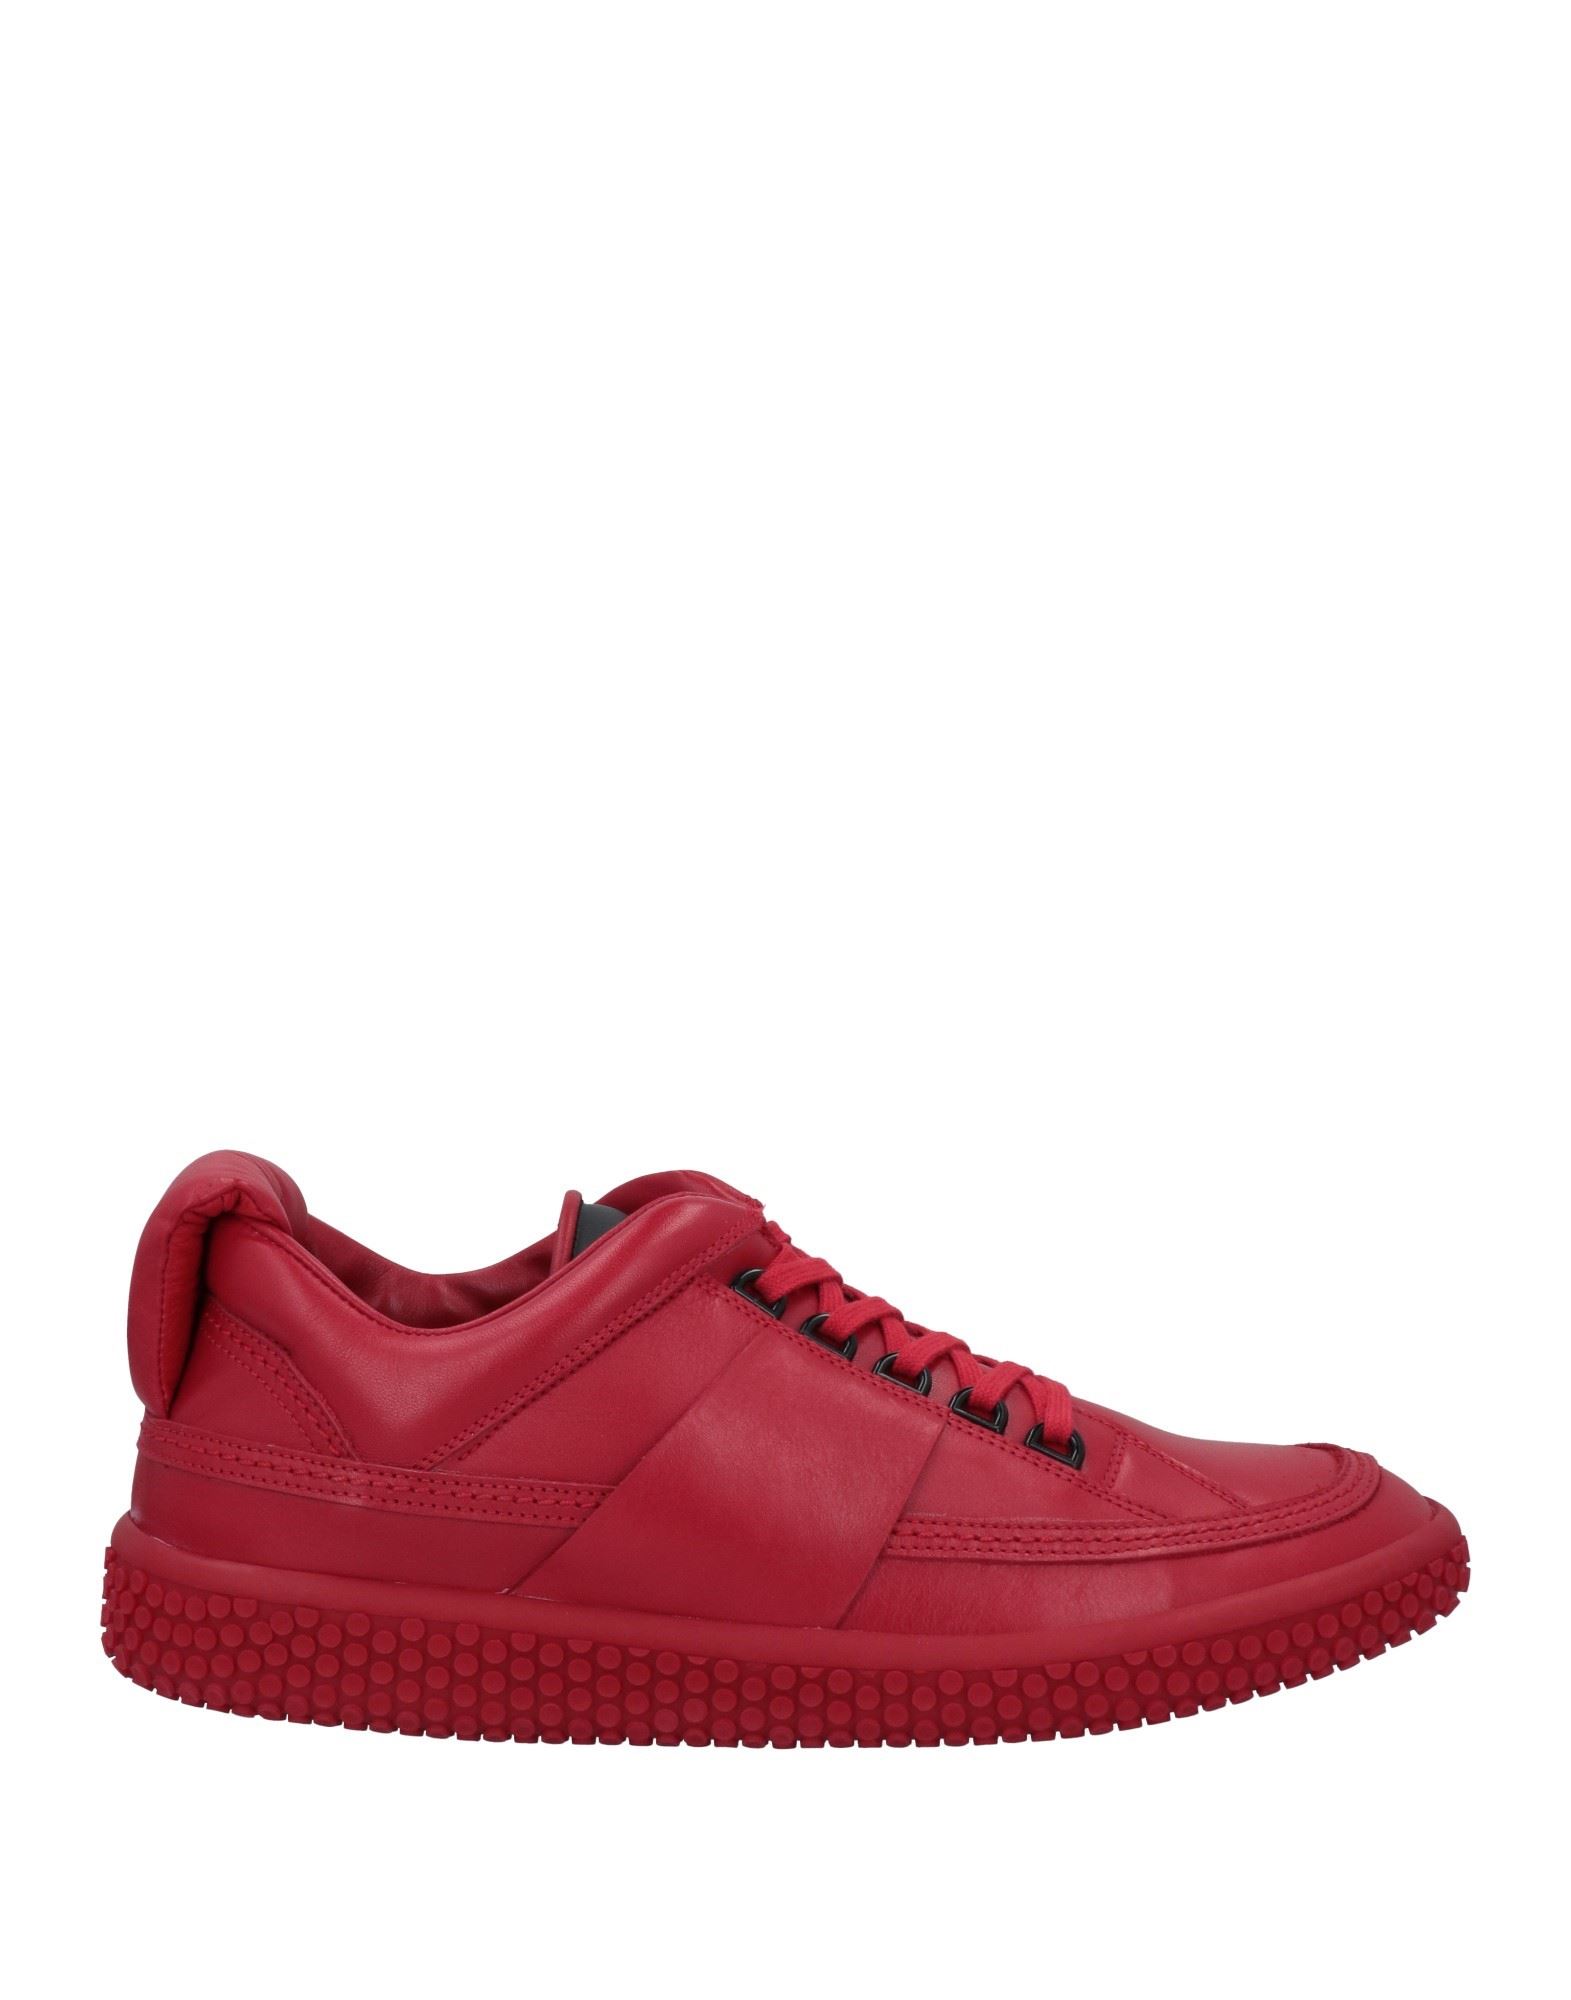 Oxs Sneakers In Red